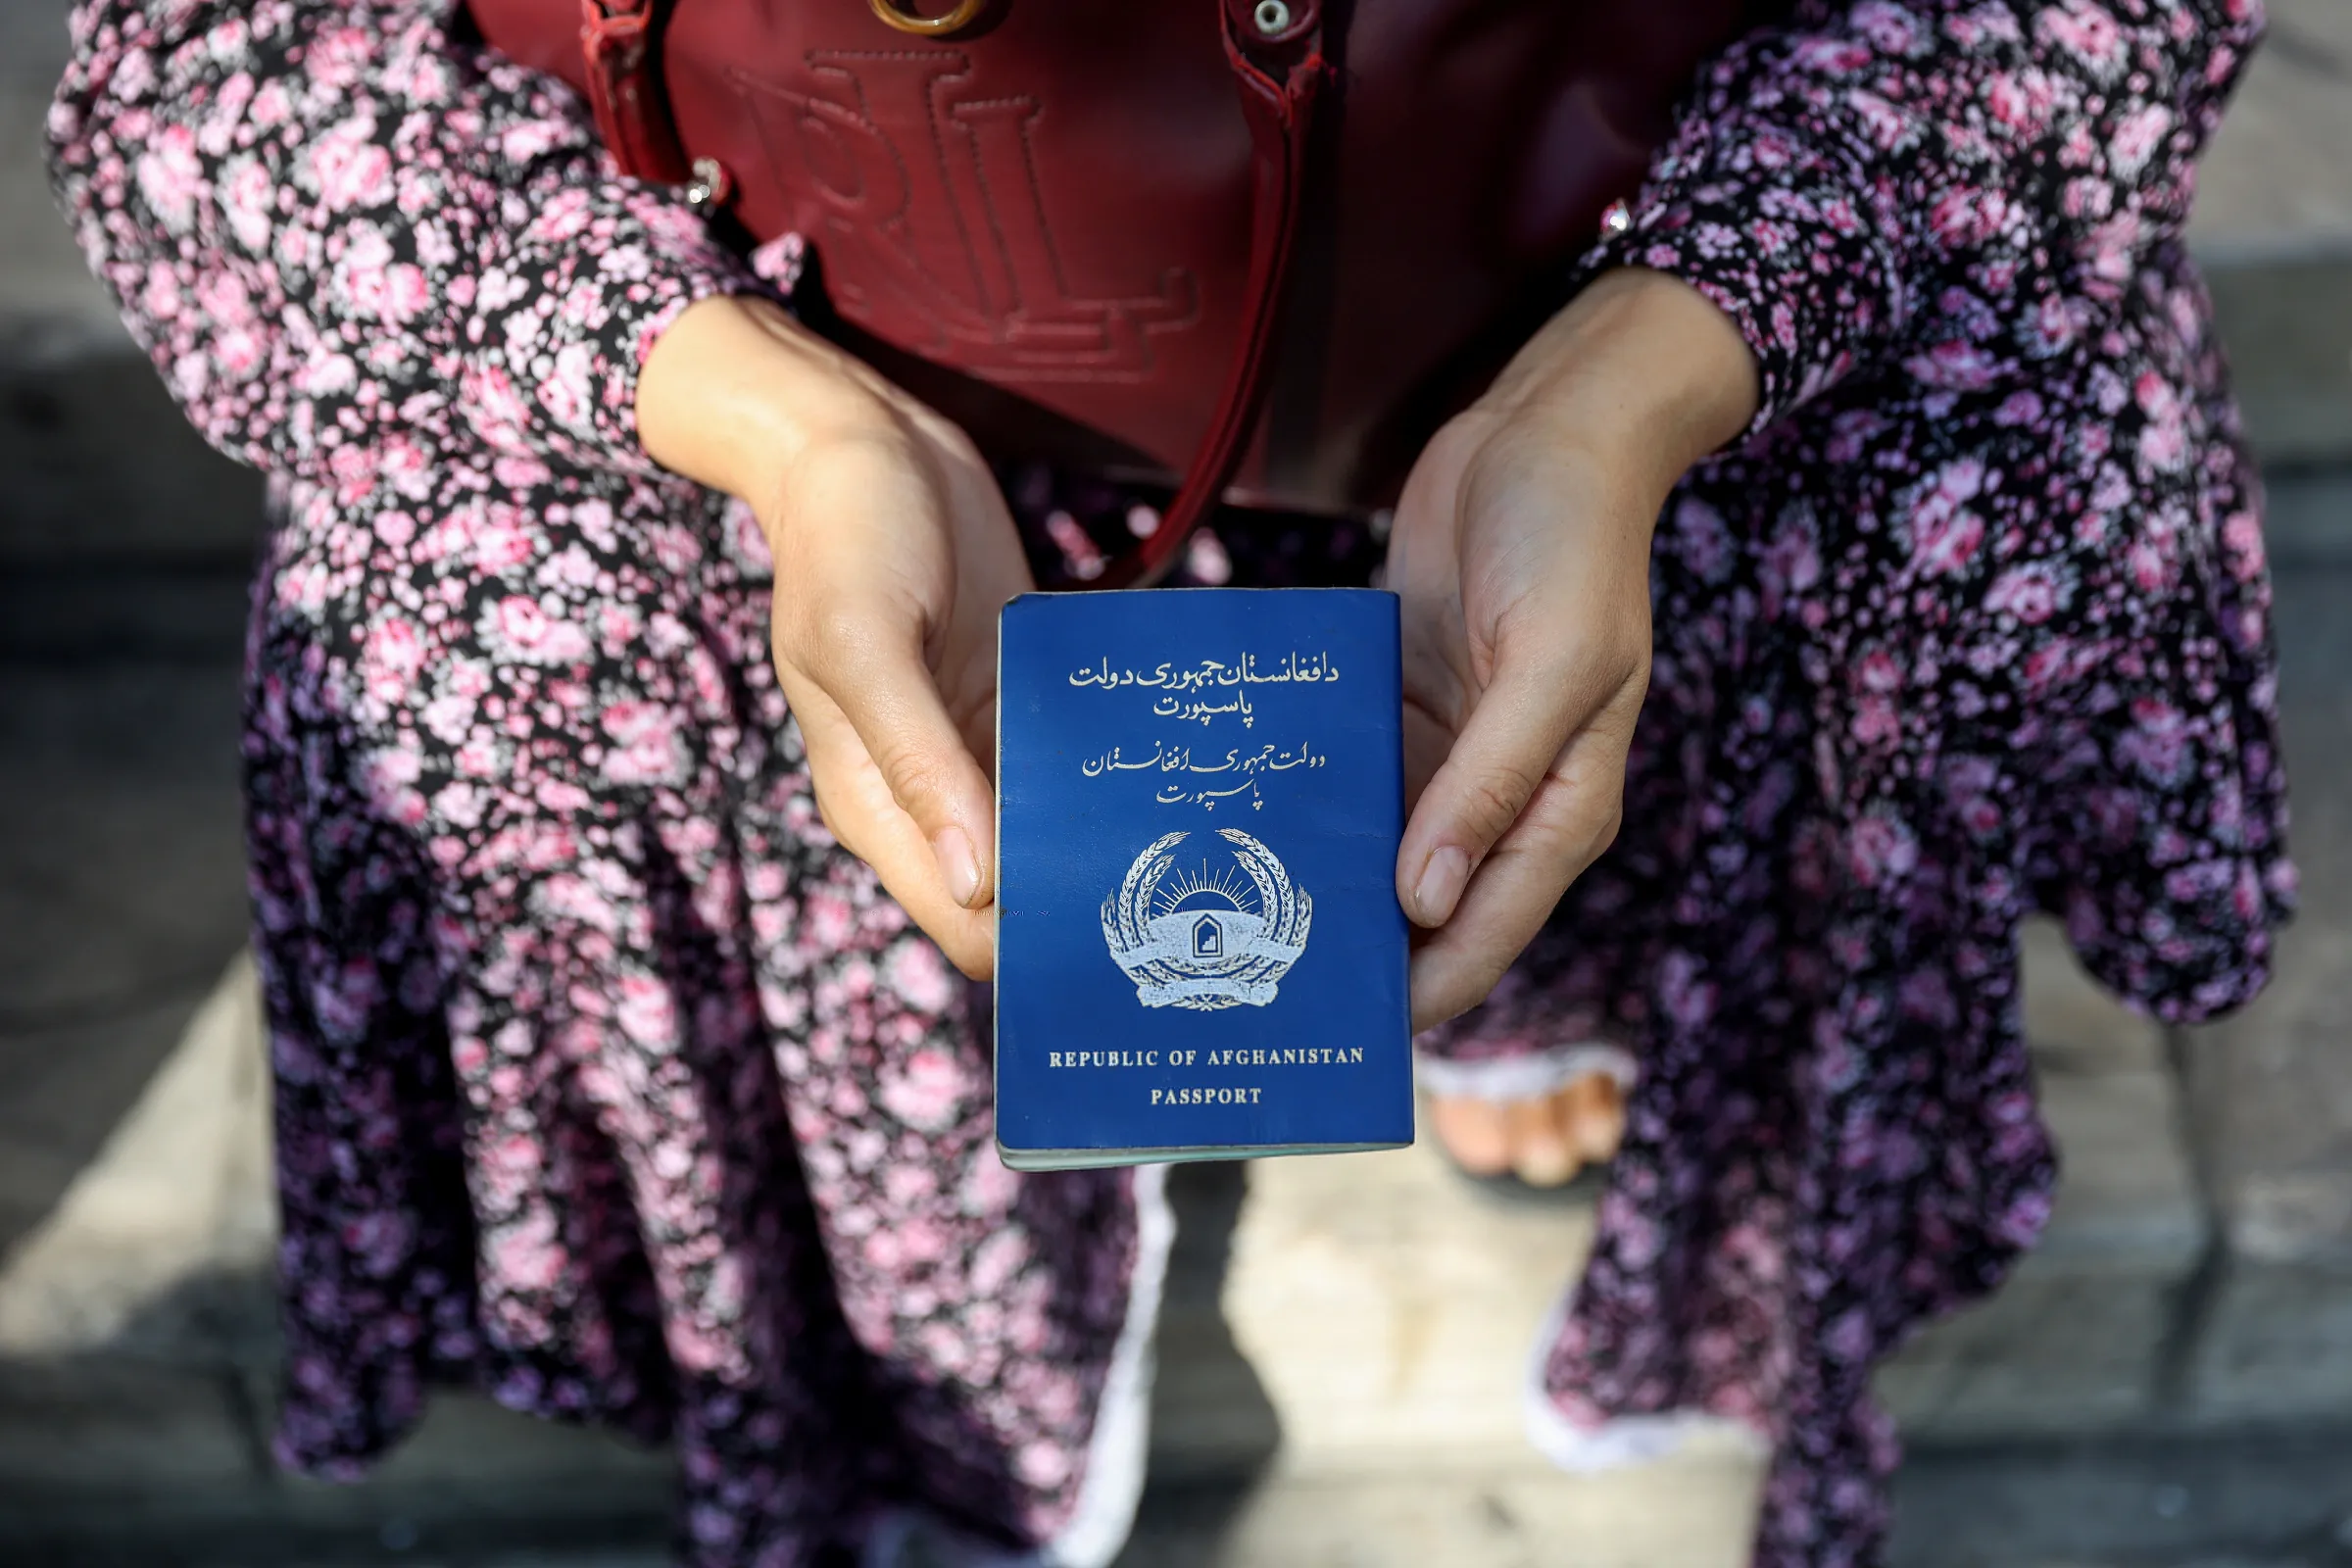 An Afghan refugee holds her passport in front of the German Embassy ​in a bid to acquire refugee visas from the European country, in Tehran, Iran September 1, 2021.